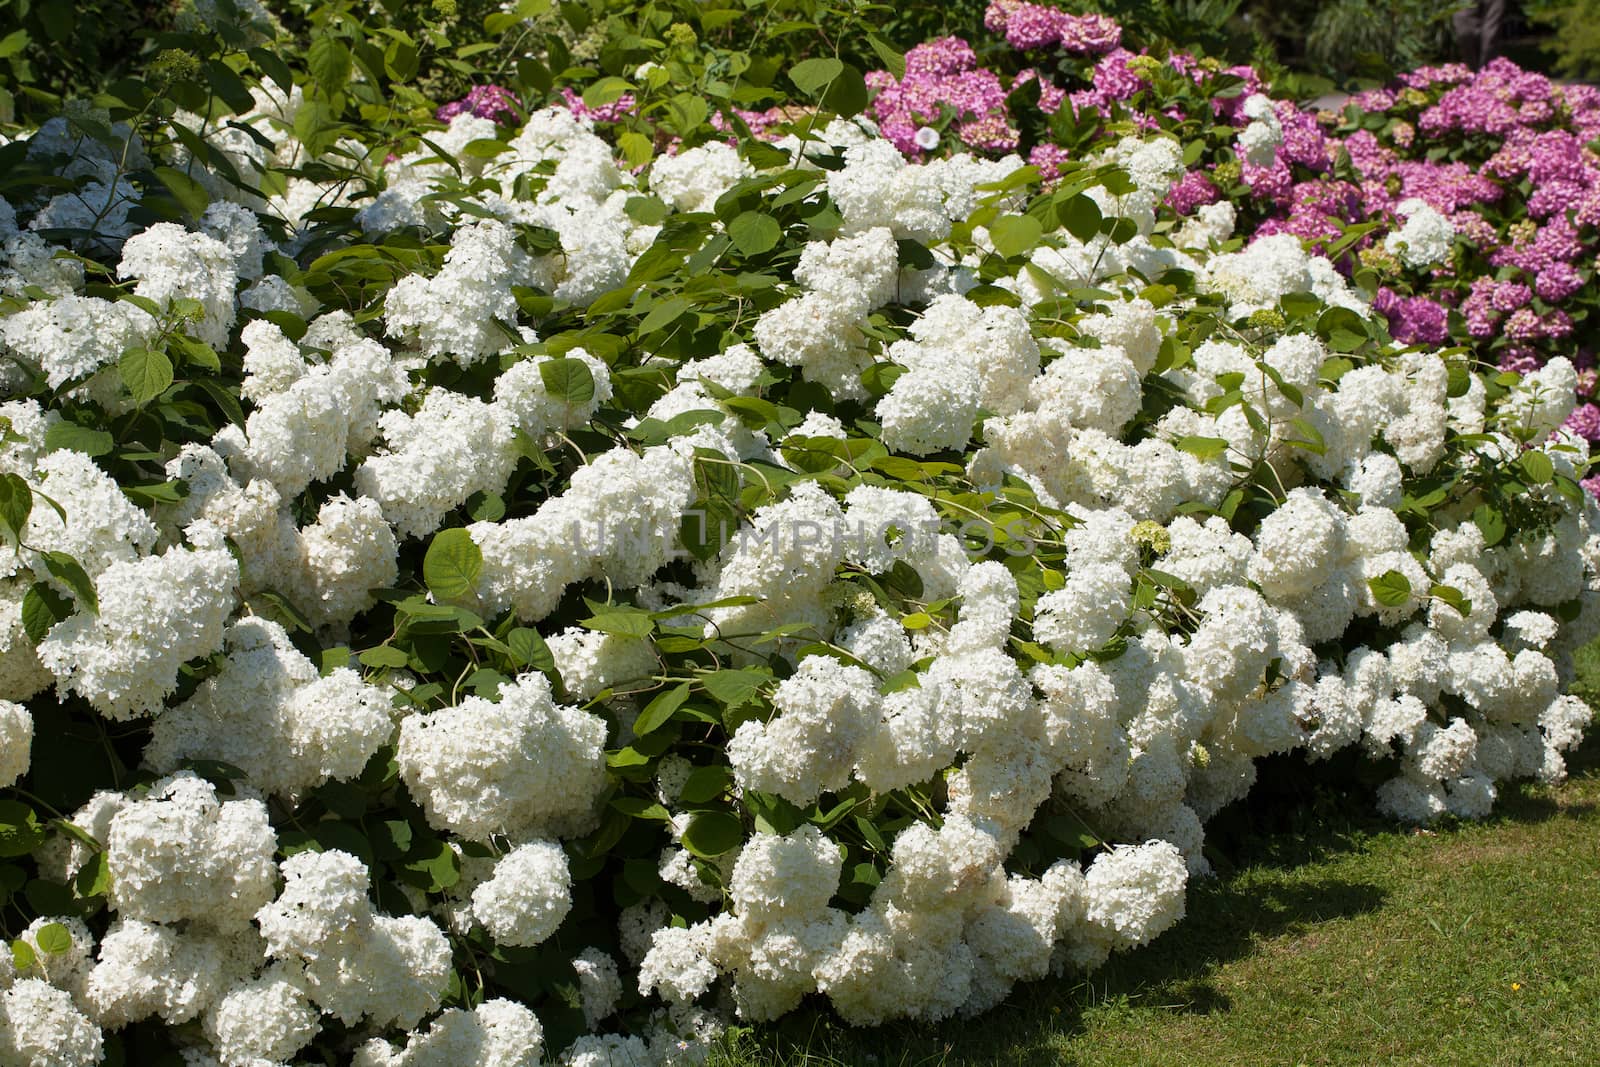 lilac and white bushes of great blossoming hortensias in the garden